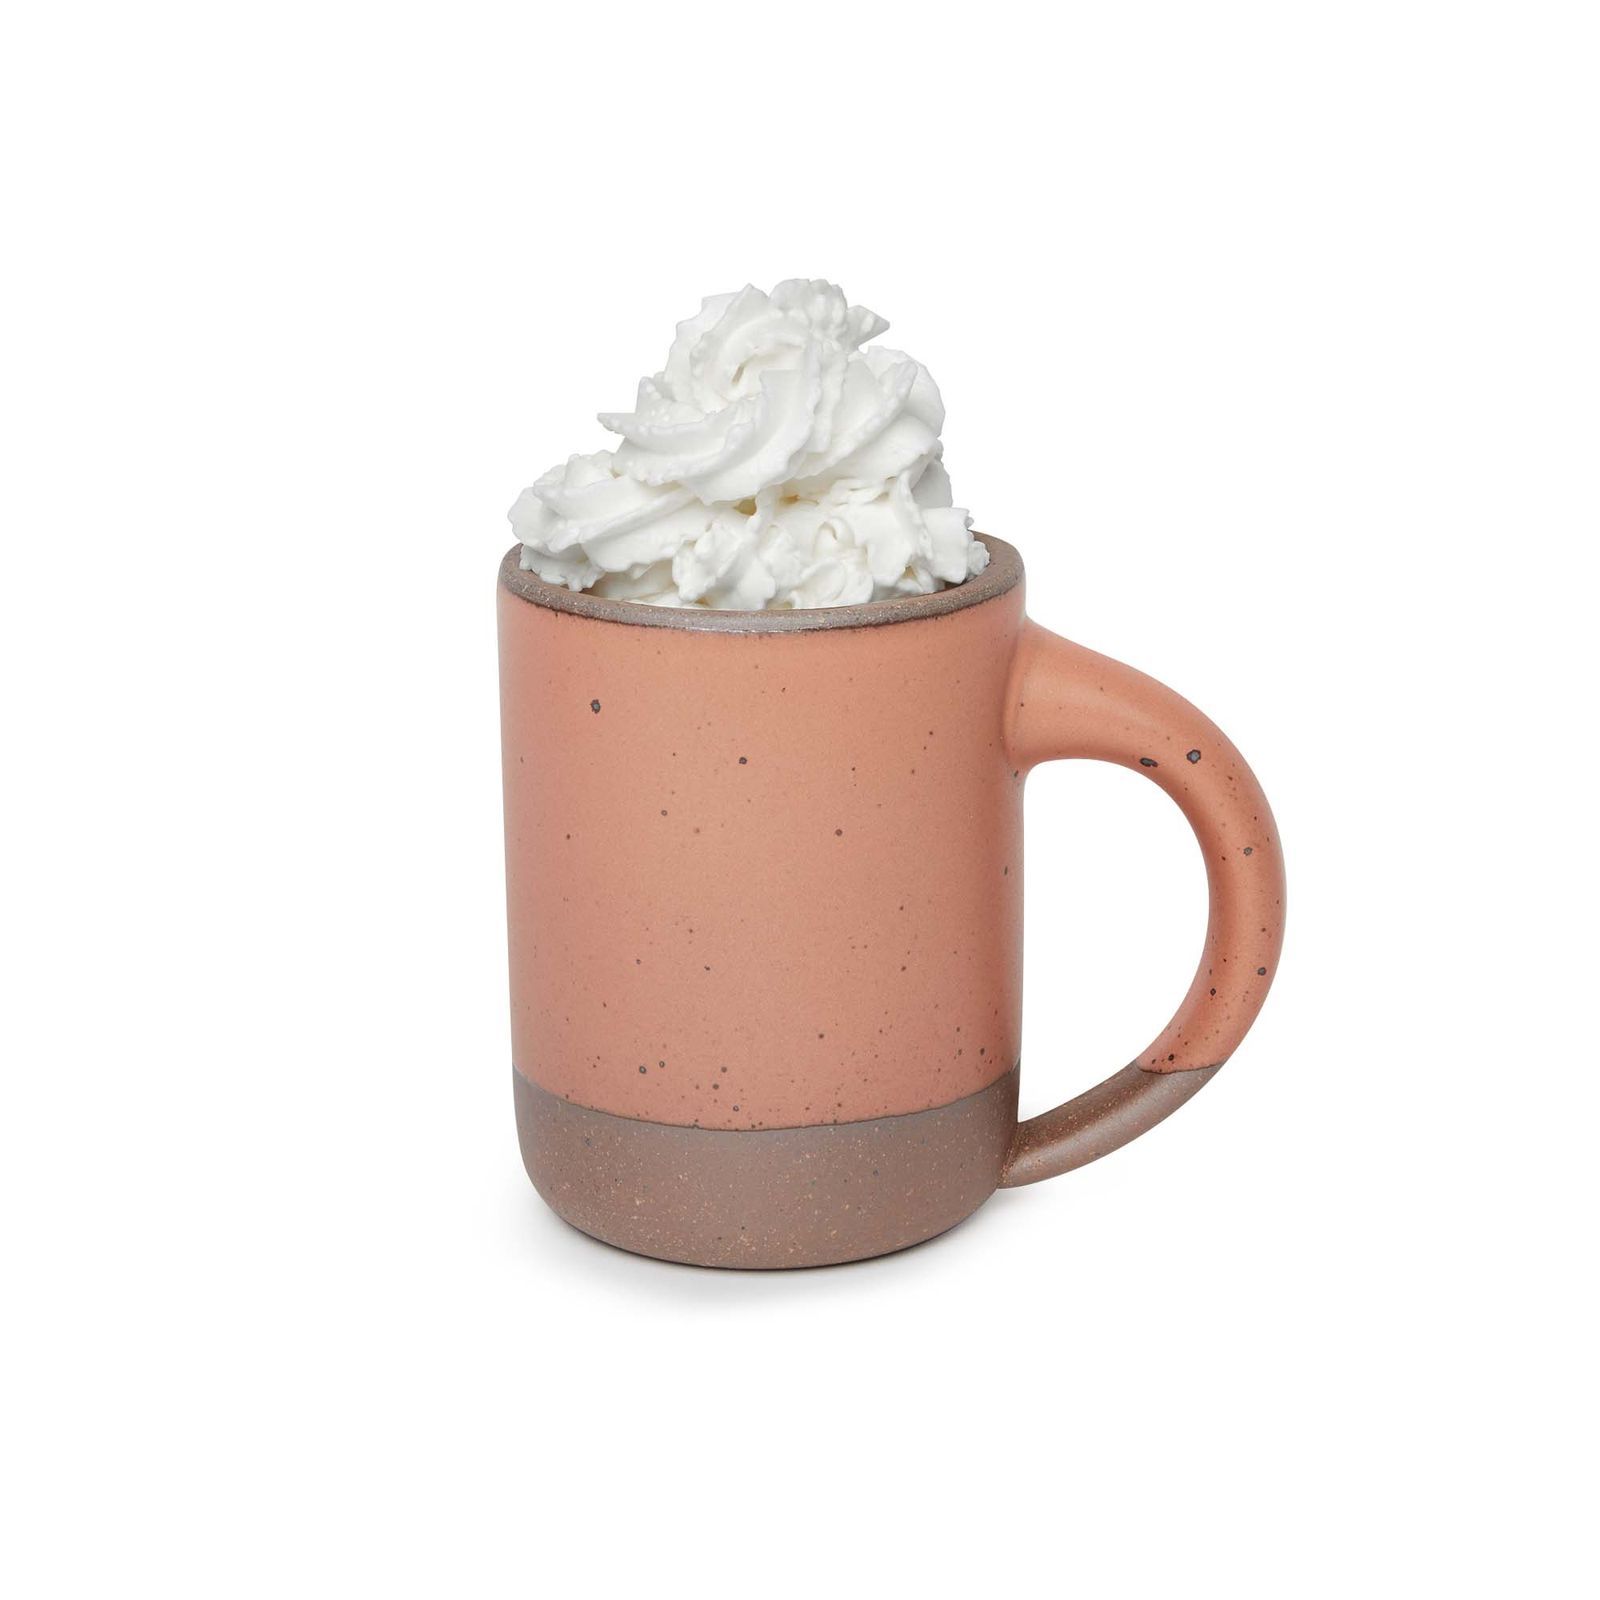 Truly, a perfectly sized and shaped mug. A dollop of whipped cream balances on top of, presumably, a cup full of hot cocoa.